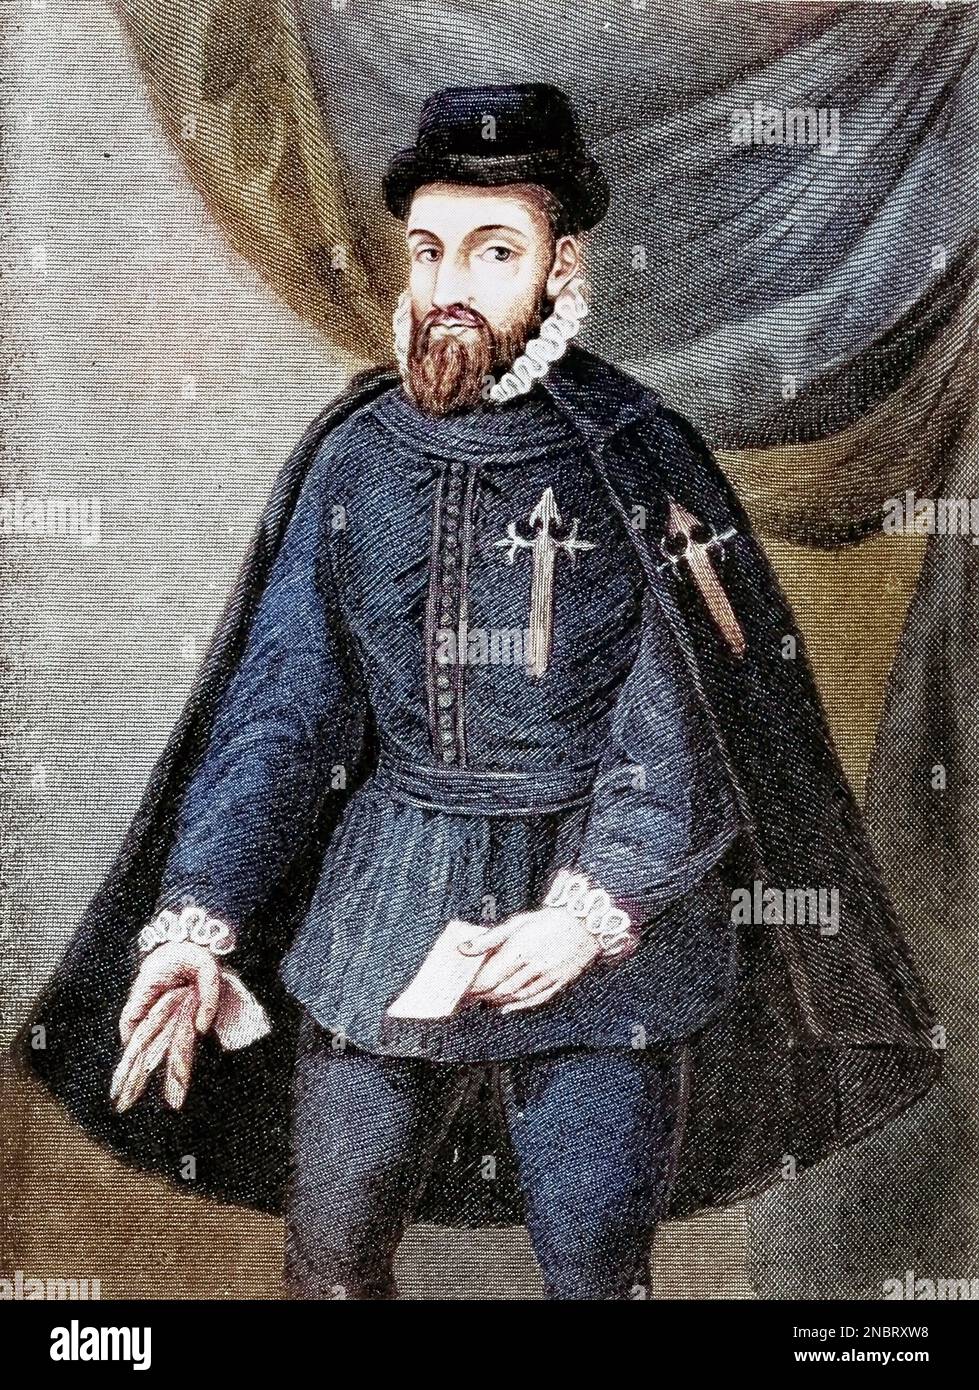 Portrait of Francisco Pizarro, (from Prescott's “Peru') from the book ' A history of Peru by Sir Clements Robert Markham, Publisher Chicago : C. H. Sergel and Company Publication date 1892 Stock Photo